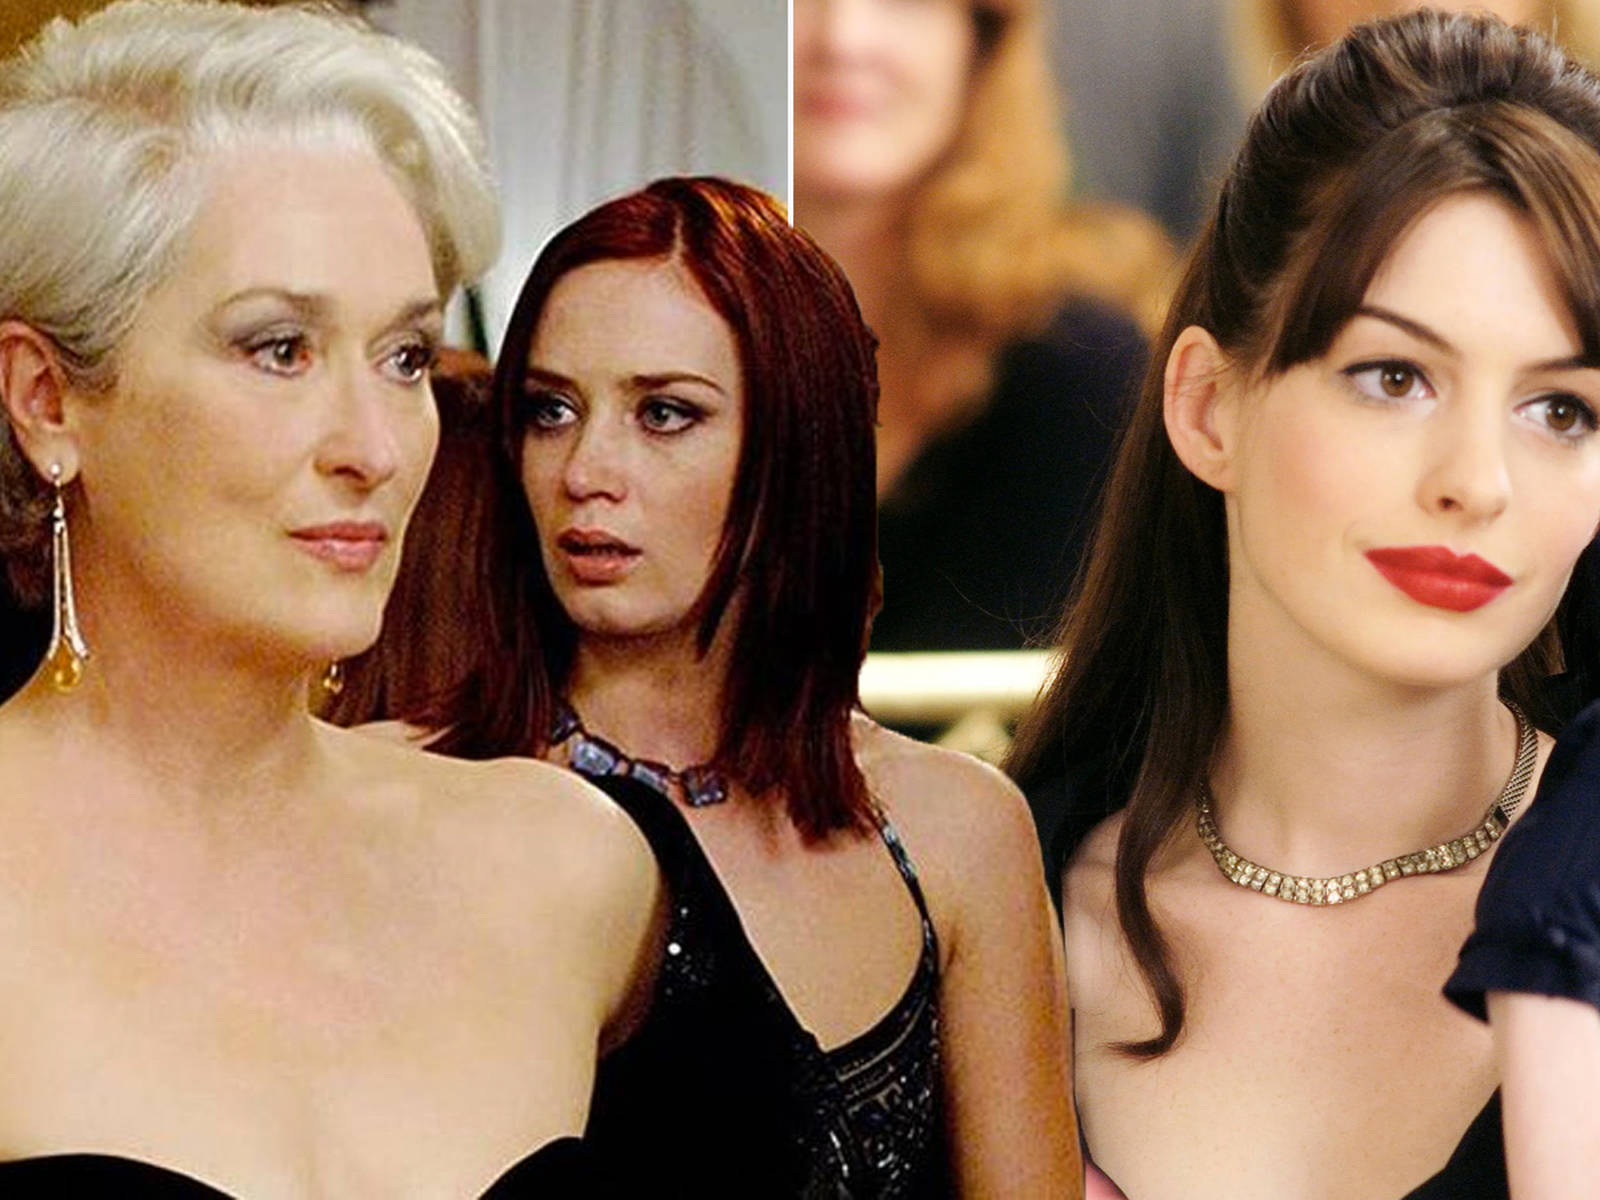 The Devil Wears Prada creator says 'discussions' have happened about a film  sequel - Heart